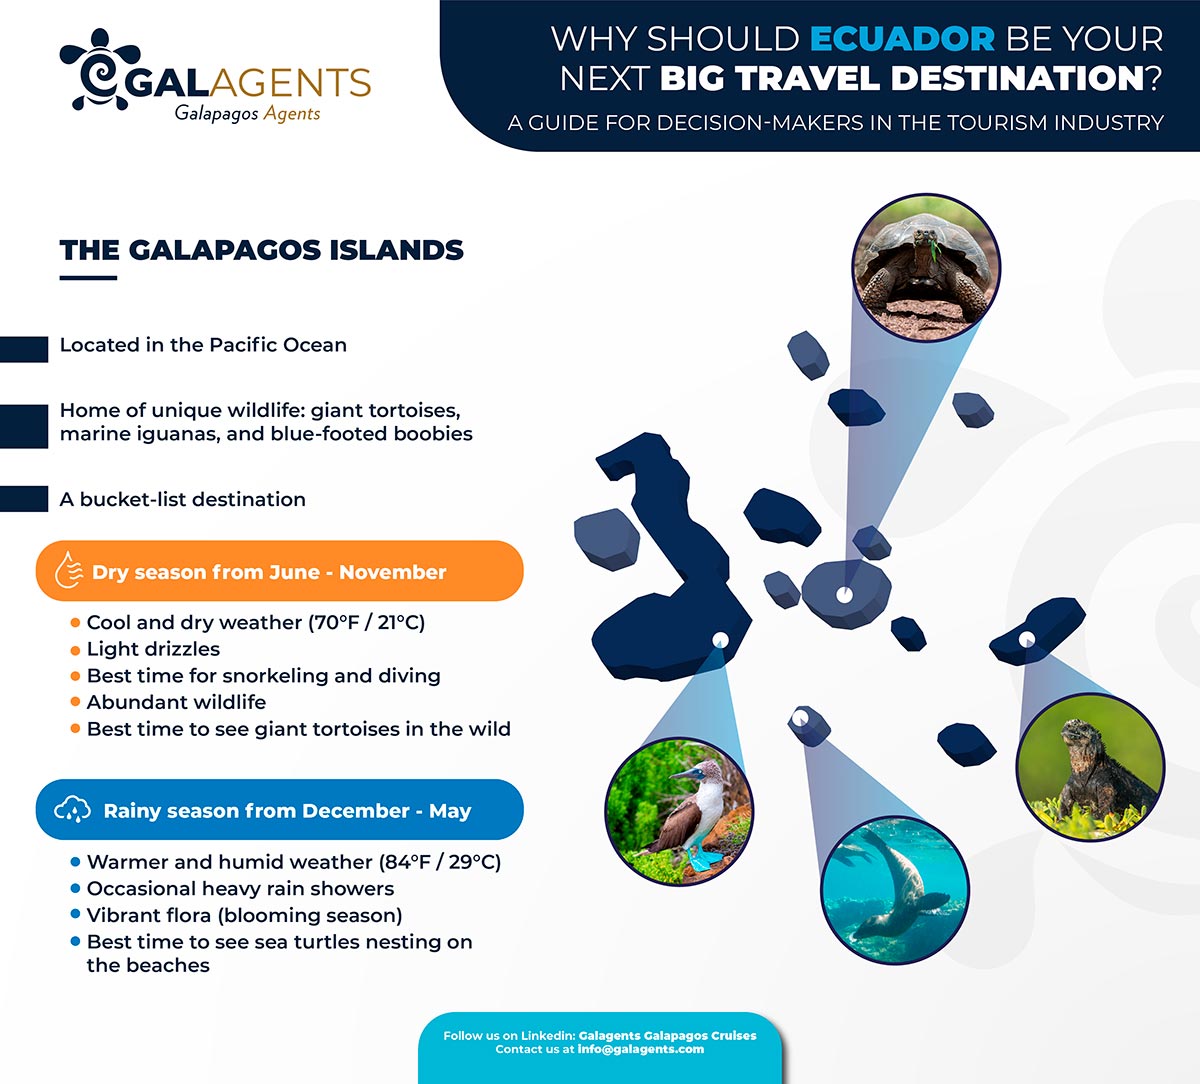 Seasons and diversity why the Galapagos Islands are considered a great tourist destination in Ecuador